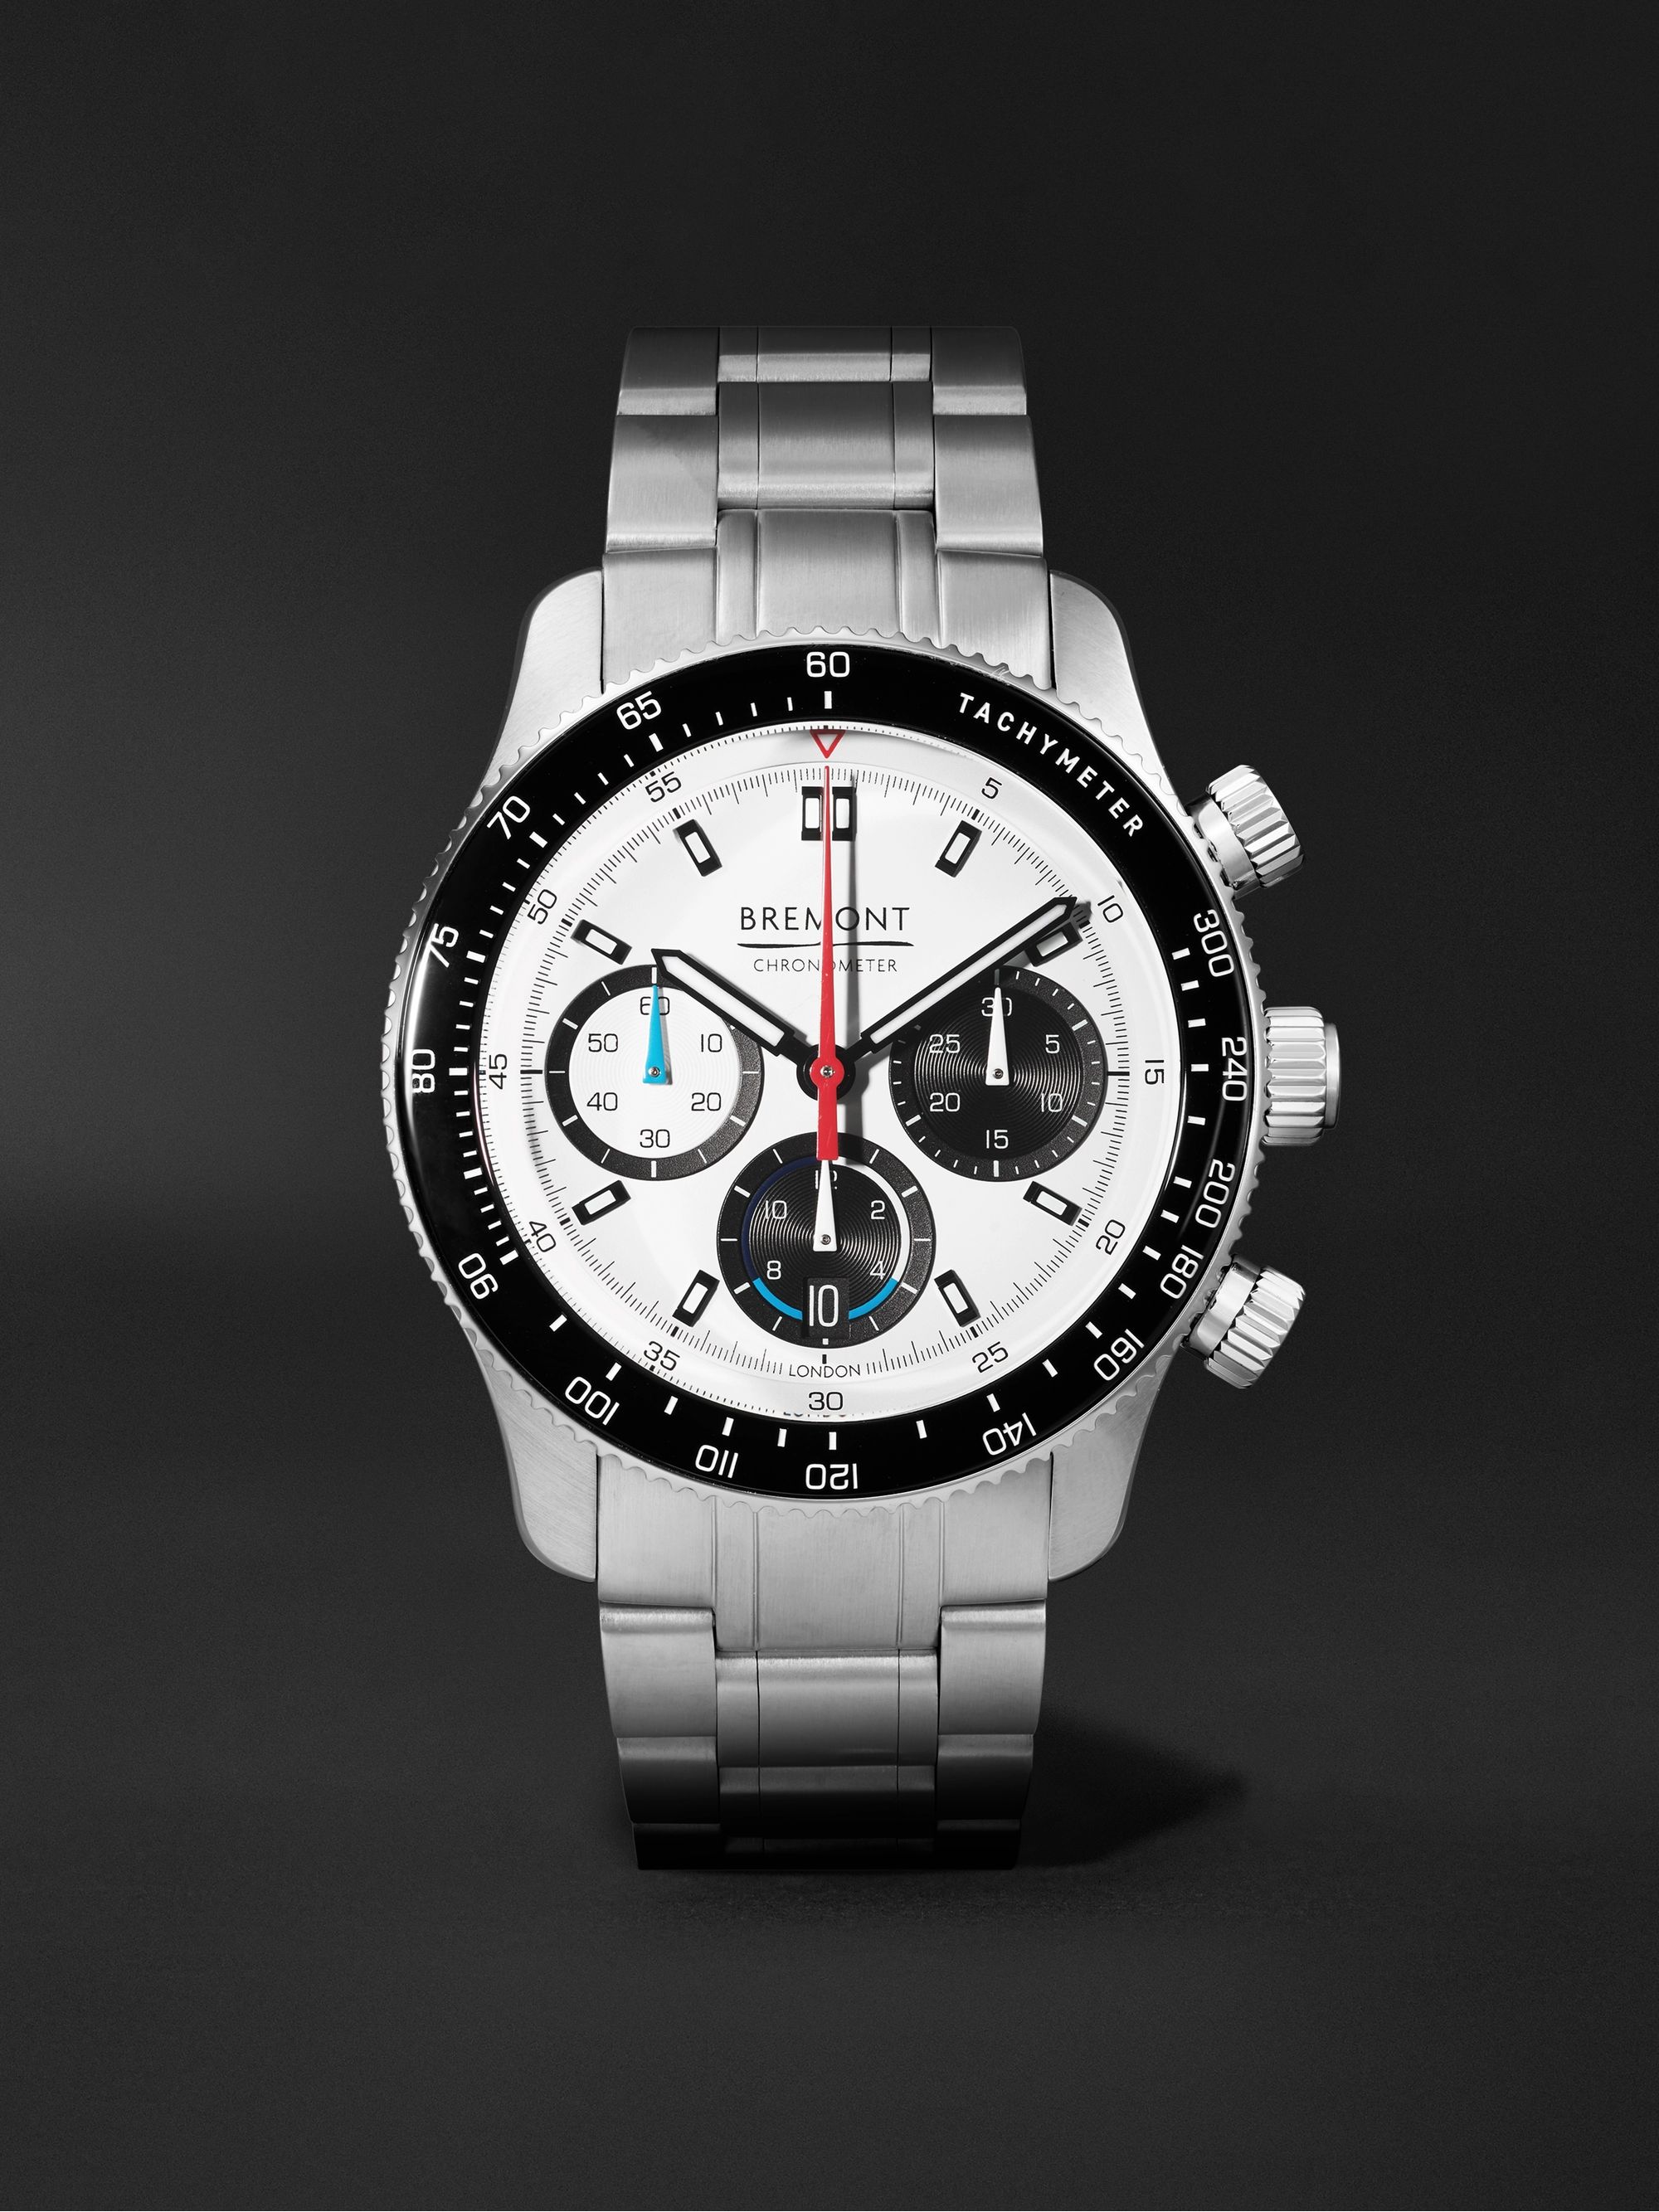 BREMONT + Williams Racing Automatic Chronograph 43mm Stainless Steel Watch, Ref. No. WR-22